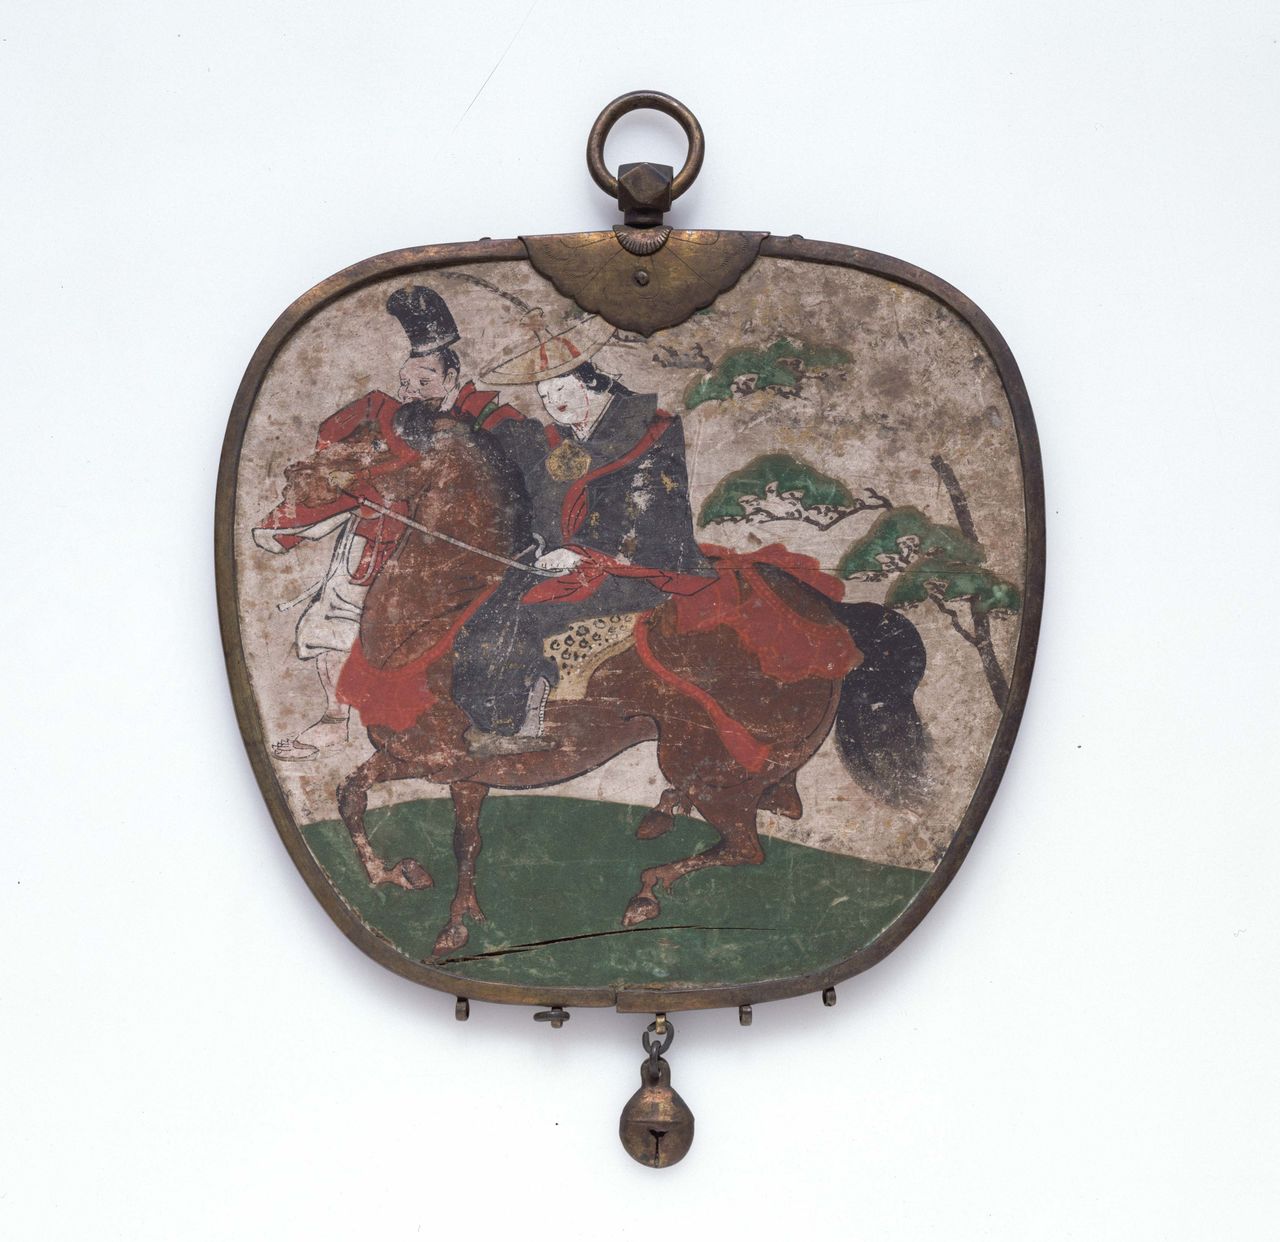 A wooden Buddhist decoration with the painting of a woman on horseback. Although different to the ema at Ōtokonushi Shrine, this is an early example of women appearing as a motif, from the Muromachi period. Its fan-shape is characteristic and represents the kind of elaborate designs for ema that began appearing in the fifteenth century. (Courtesy Tokyo National Museum)